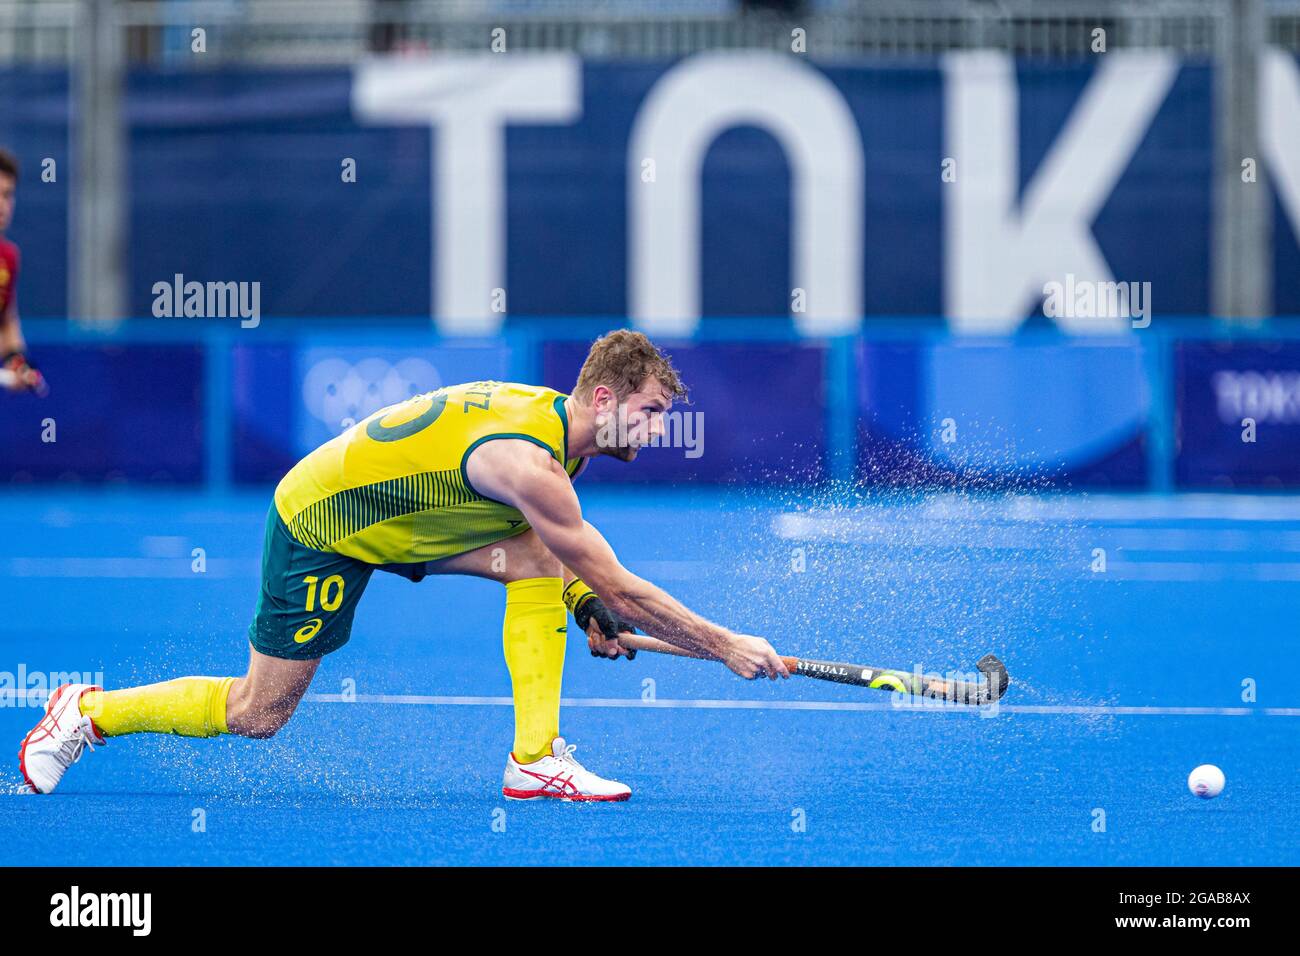 Tokyo, Japan. 30th July, 2021. Olympic Games: Hockey match between Spain v Australia. Credit: ABEL F. ROS/Alamy Live News Stock Photo